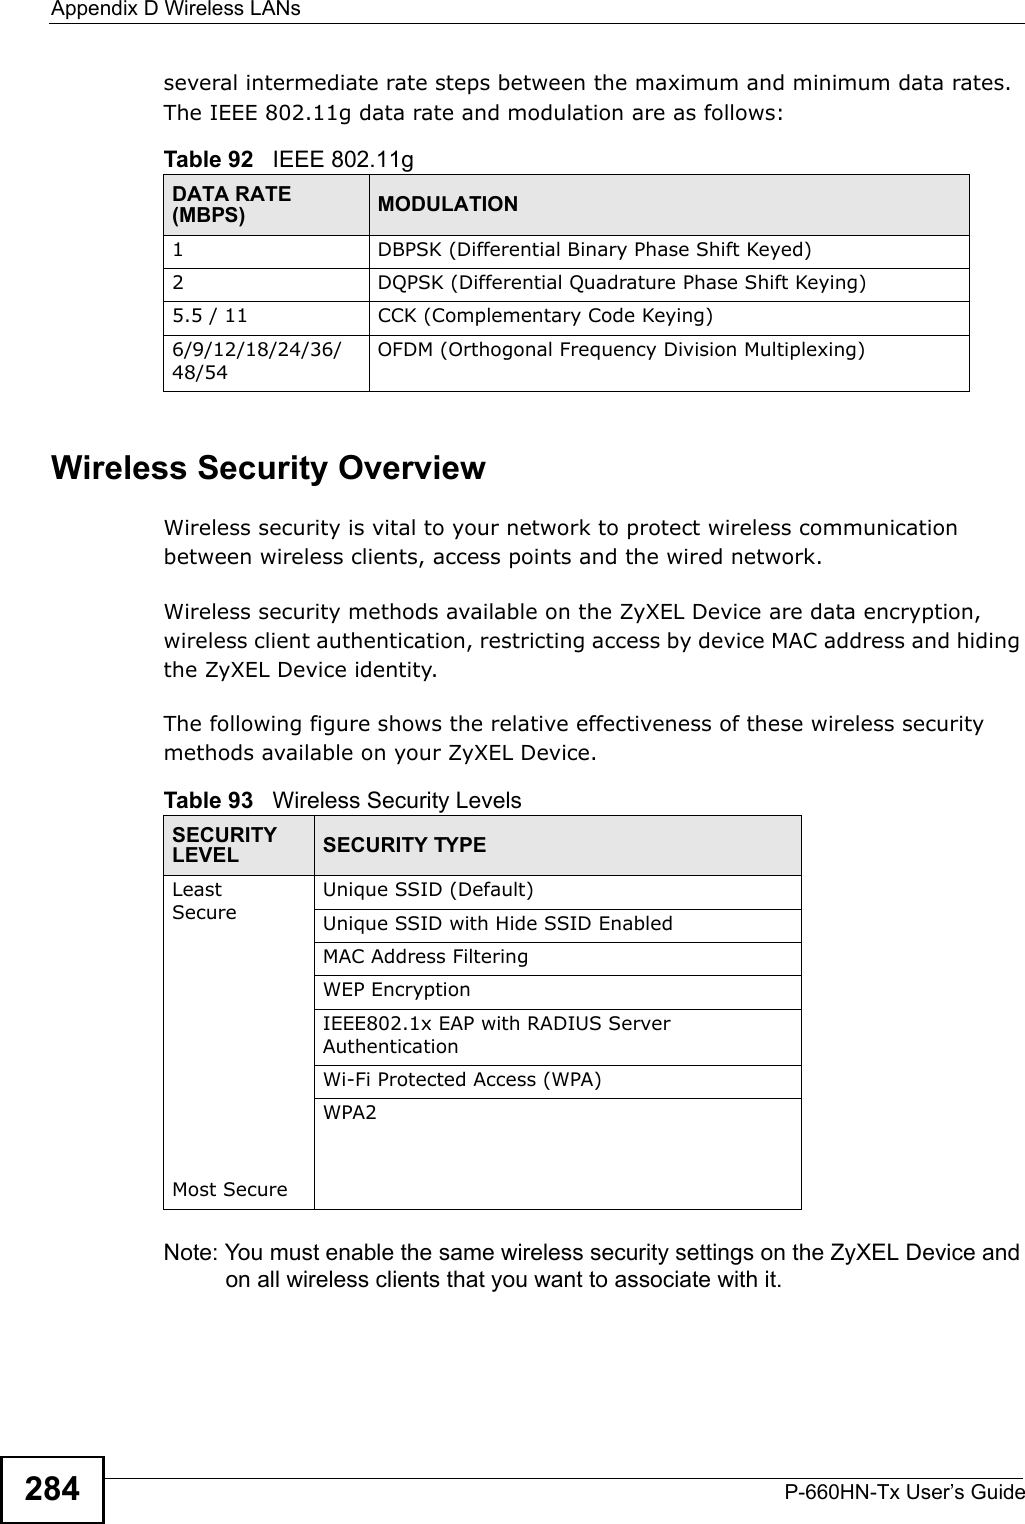 Appendix D Wireless LANsP-660HN-Tx User’s Guide284several intermediate rate steps between the maximum and minimum data rates. The IEEE 802.11g data rate and modulation are as follows:Wireless Security OverviewWireless security is vital to your network to protect wireless communication between wireless clients, access points and the wired network.Wireless security methods available on the ZyXEL Device are data encryption, wireless client authentication, restricting access by device MAC address and hiding the ZyXEL Device identity.The following figure shows the relative effectiveness of these wireless security methods available on your ZyXEL Device.Note: You must enable the same wireless security settings on the ZyXEL Device and on all wireless clients that you want to associate with it. Table 92   IEEE 802.11gDATA RATE (MBPS) MODULATION1 DBPSK (Differential Binary Phase Shift Keyed)2 DQPSK (Differential Quadrature Phase Shift Keying)5.5 / 11 CCK (Complementary Code Keying) 6/9/12/18/24/36/48/54OFDM (Orthogonal Frequency Division Multiplexing) Table 93   Wireless Security LevelsSECURITY LEVEL SECURITY TYPELeast       Secure                                                                                  Most SecureUnique SSID (Default)Unique SSID with Hide SSID EnabledMAC Address FilteringWEP EncryptionIEEE802.1x EAP with RADIUS Server AuthenticationWi-Fi Protected Access (WPA)WPA2